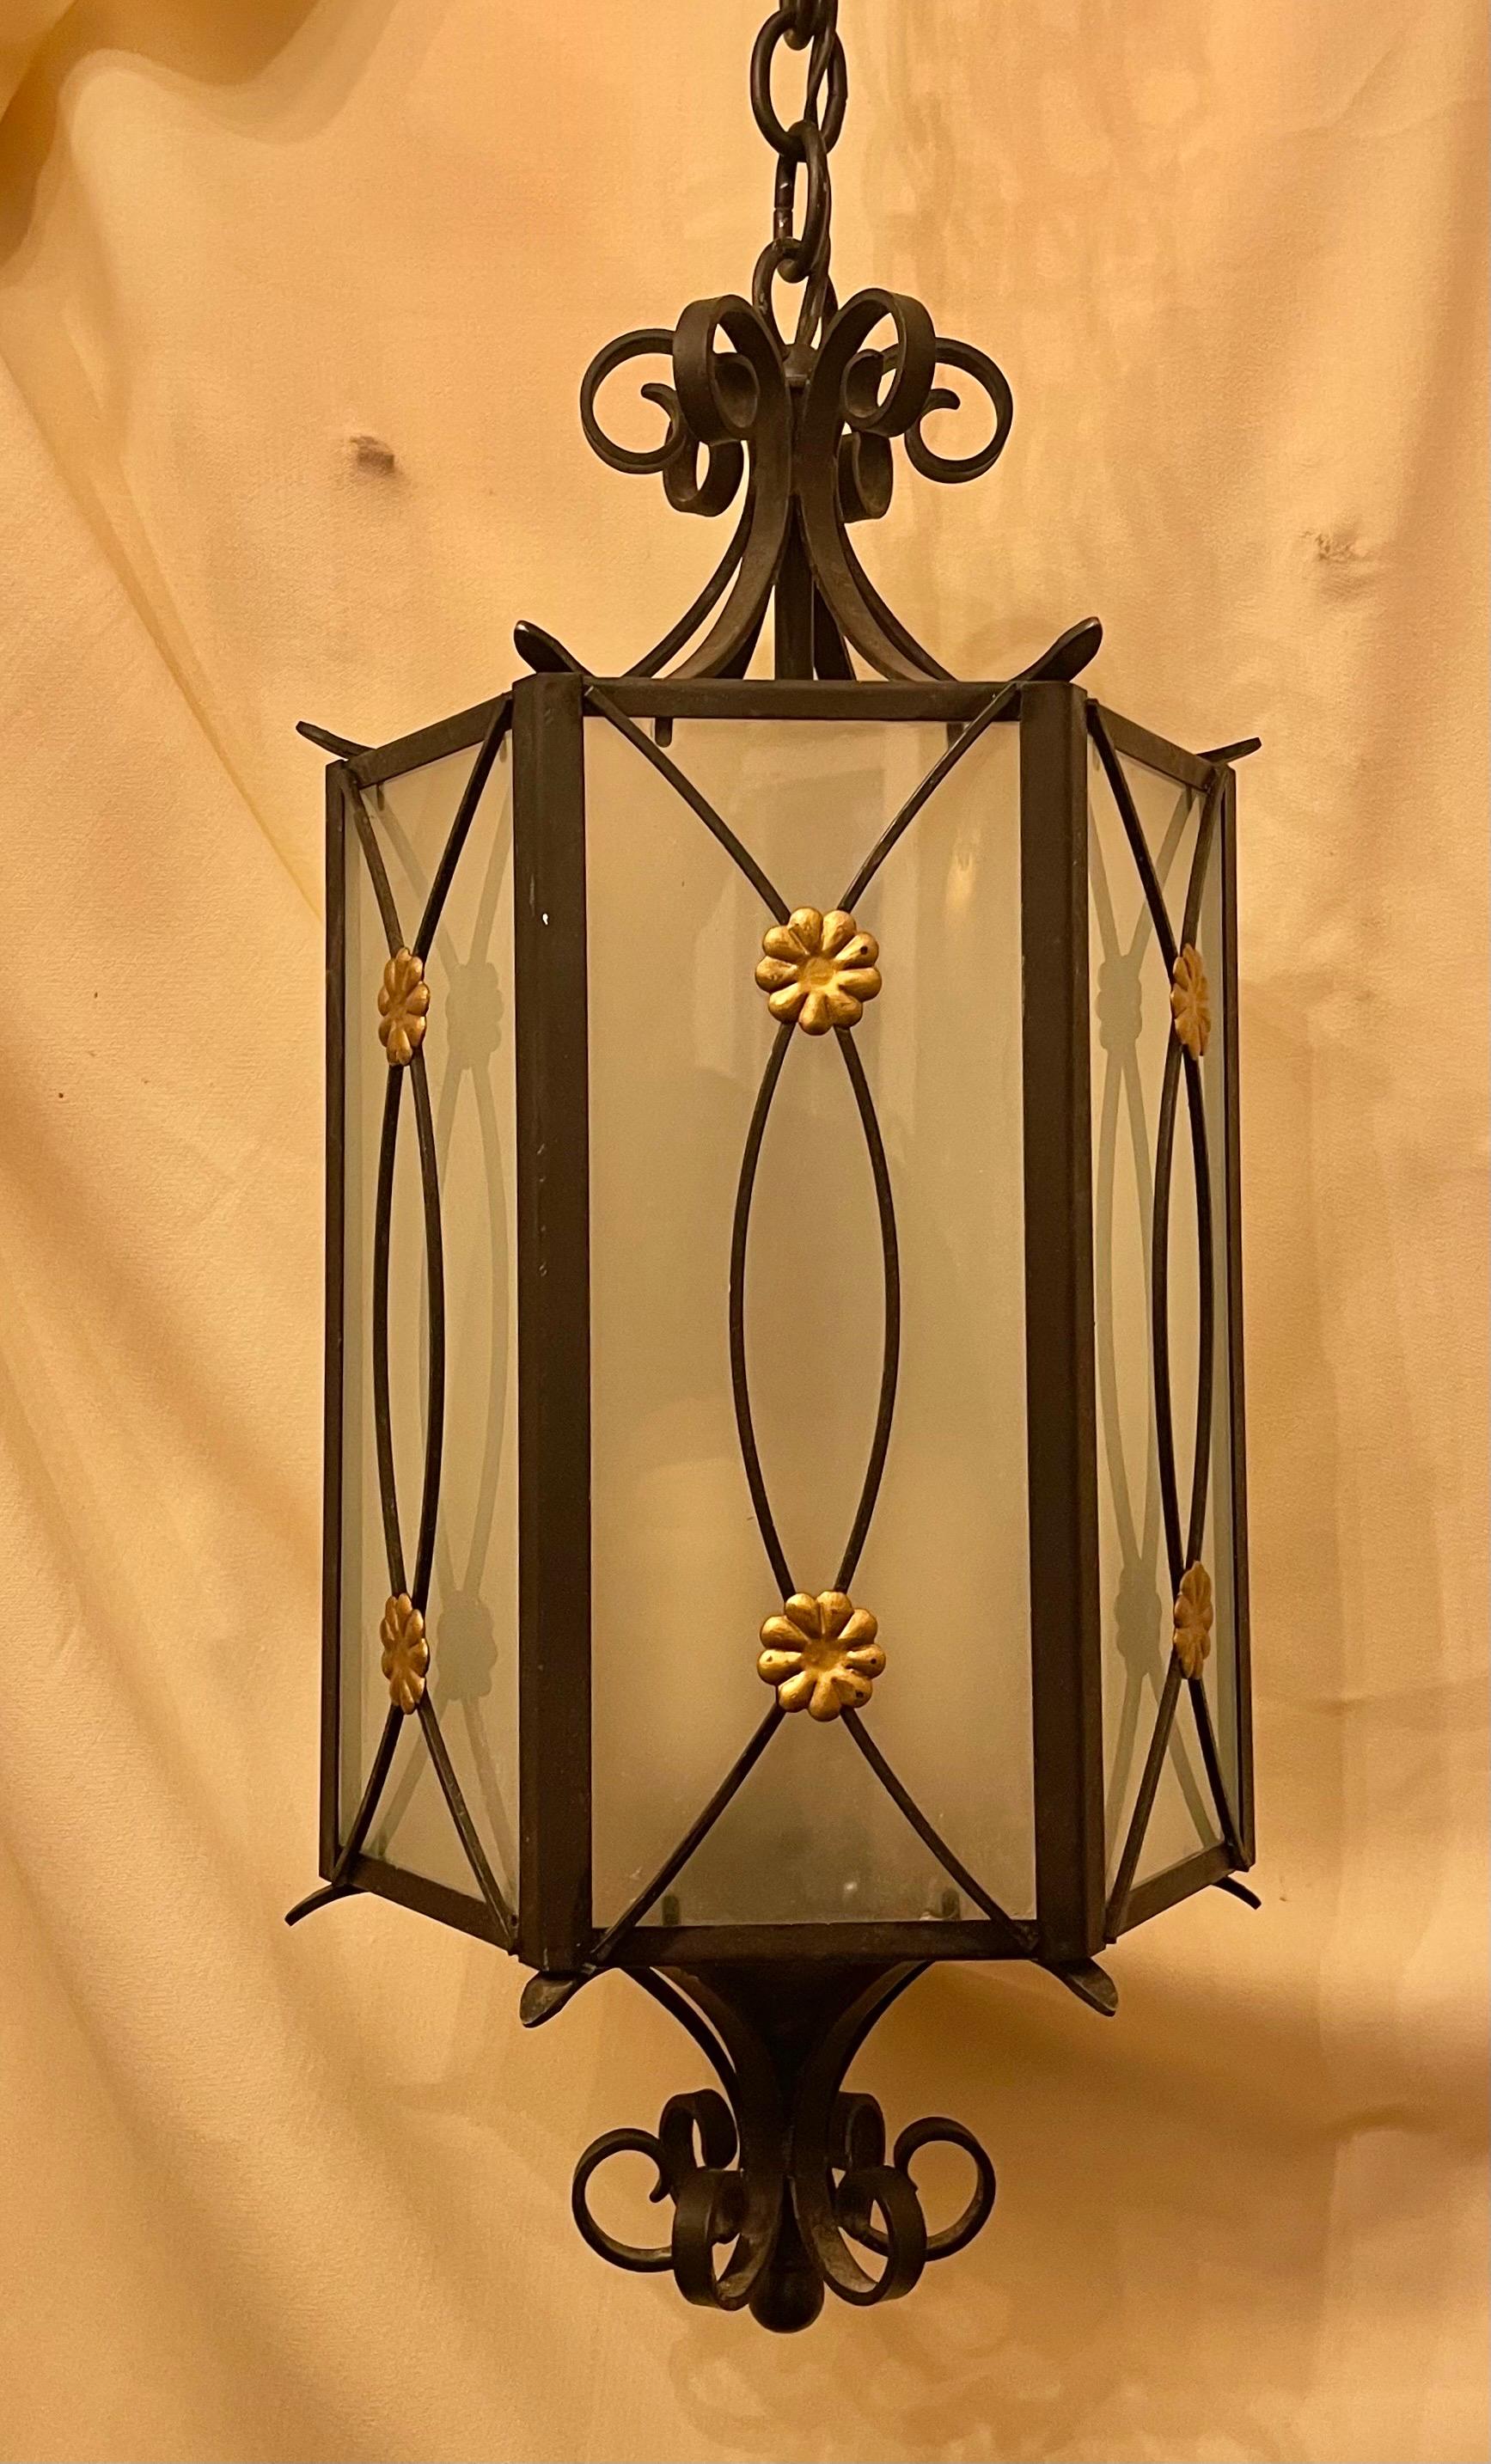 A wonderful regency iron with gold gilt flower rosette medallion with inset frosted glass panel hexagon hexagon shaped lantern fixture with 3 interior candelabra sockets.